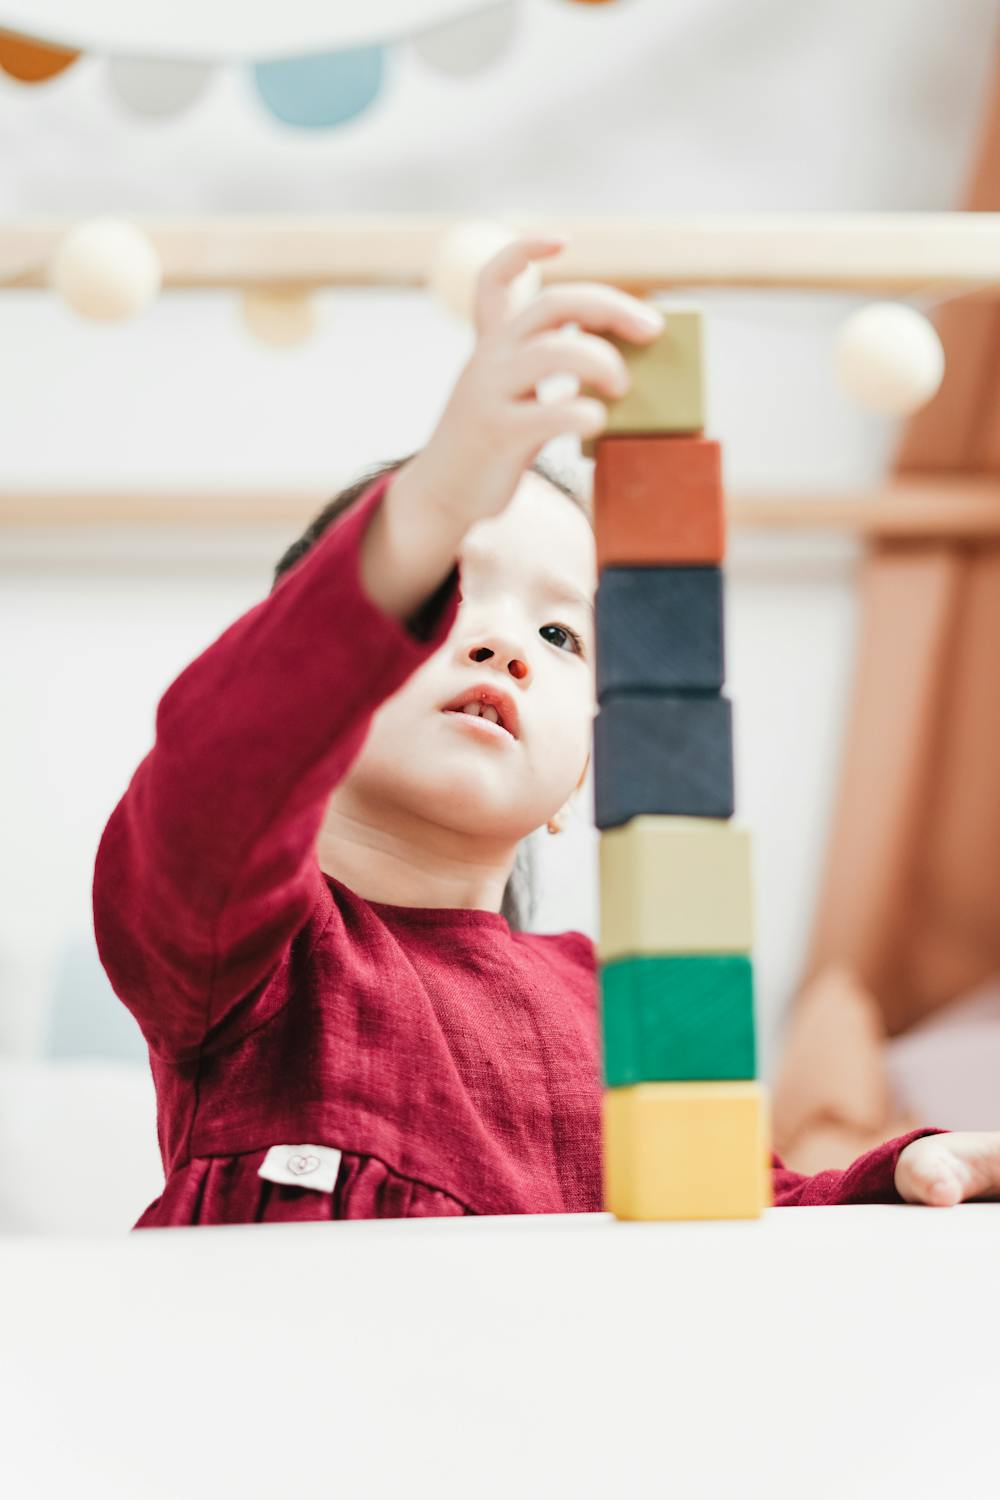 child building tower with blocks